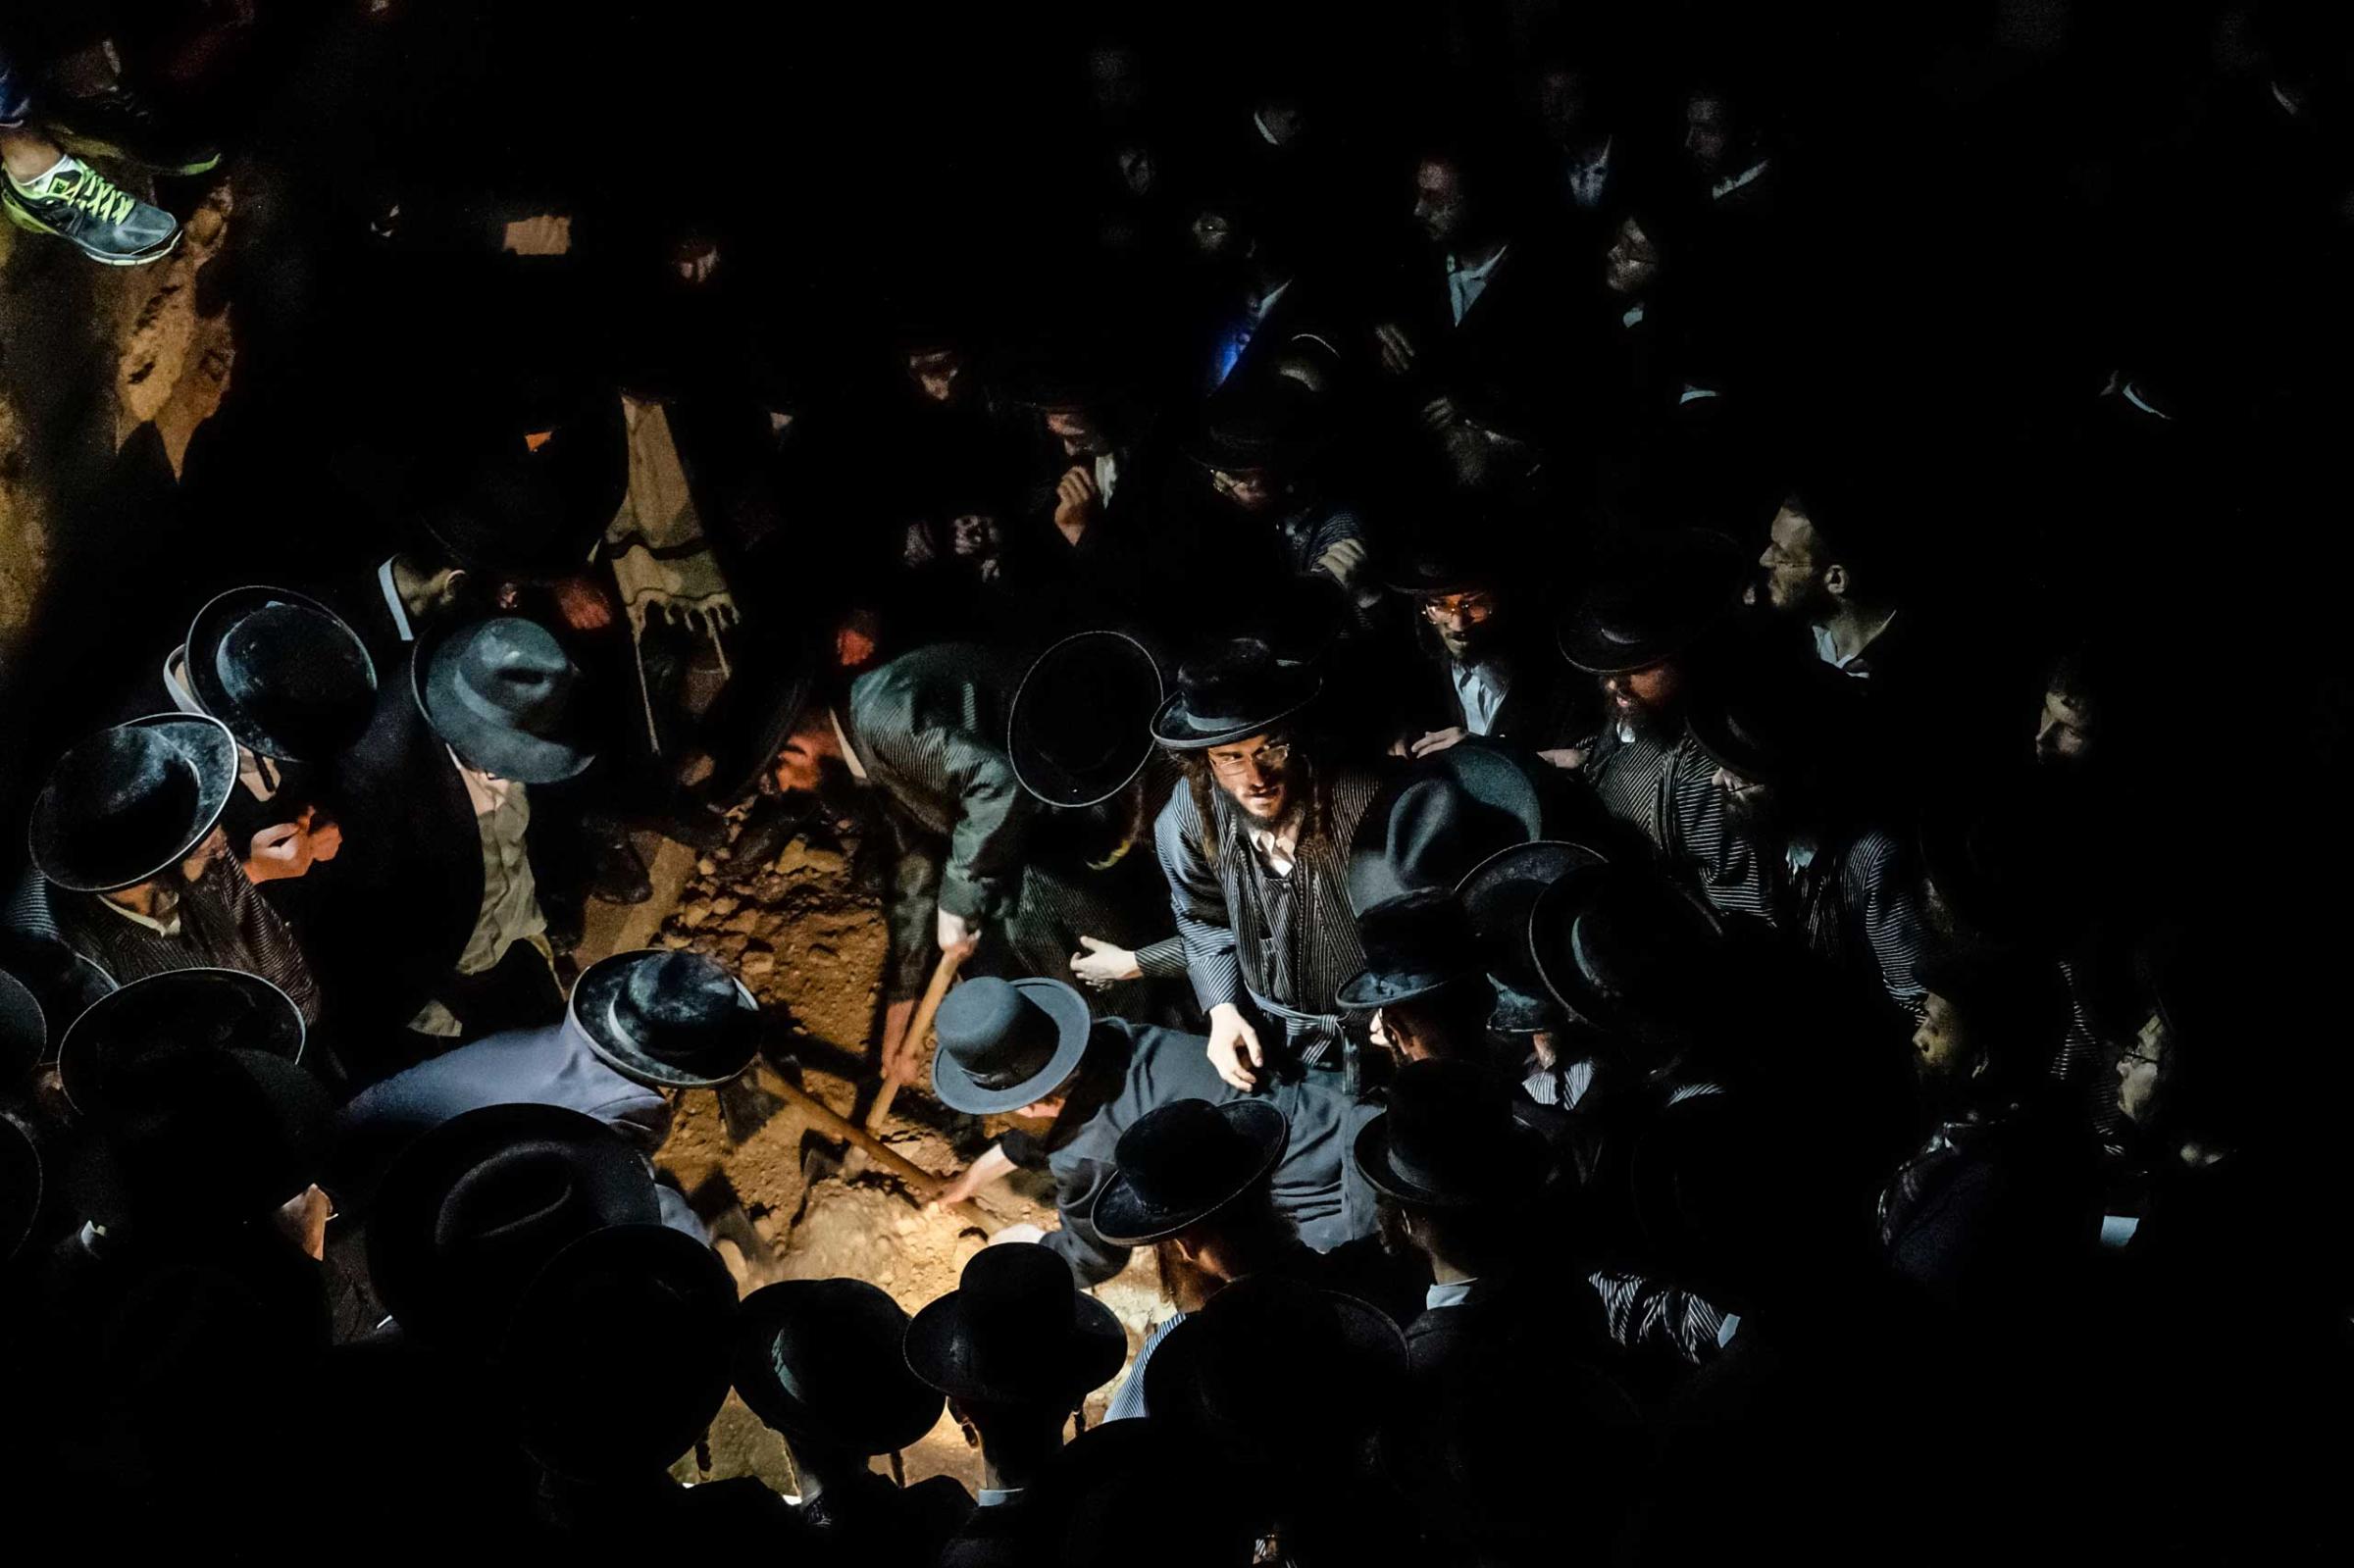 ISRAEL. Jerusalem. August 5, 2014. The funeral of Avraham Walz, 29, killed in an attack earlier that day by a Palestinian in a stolen digger.  Six Israelis were injured and the assailant, identified as Muhammed Naif el-Jaíabis.  Walz was a member of Toldos Aharon, a strongly Anti-Zionist Hasidic movement.